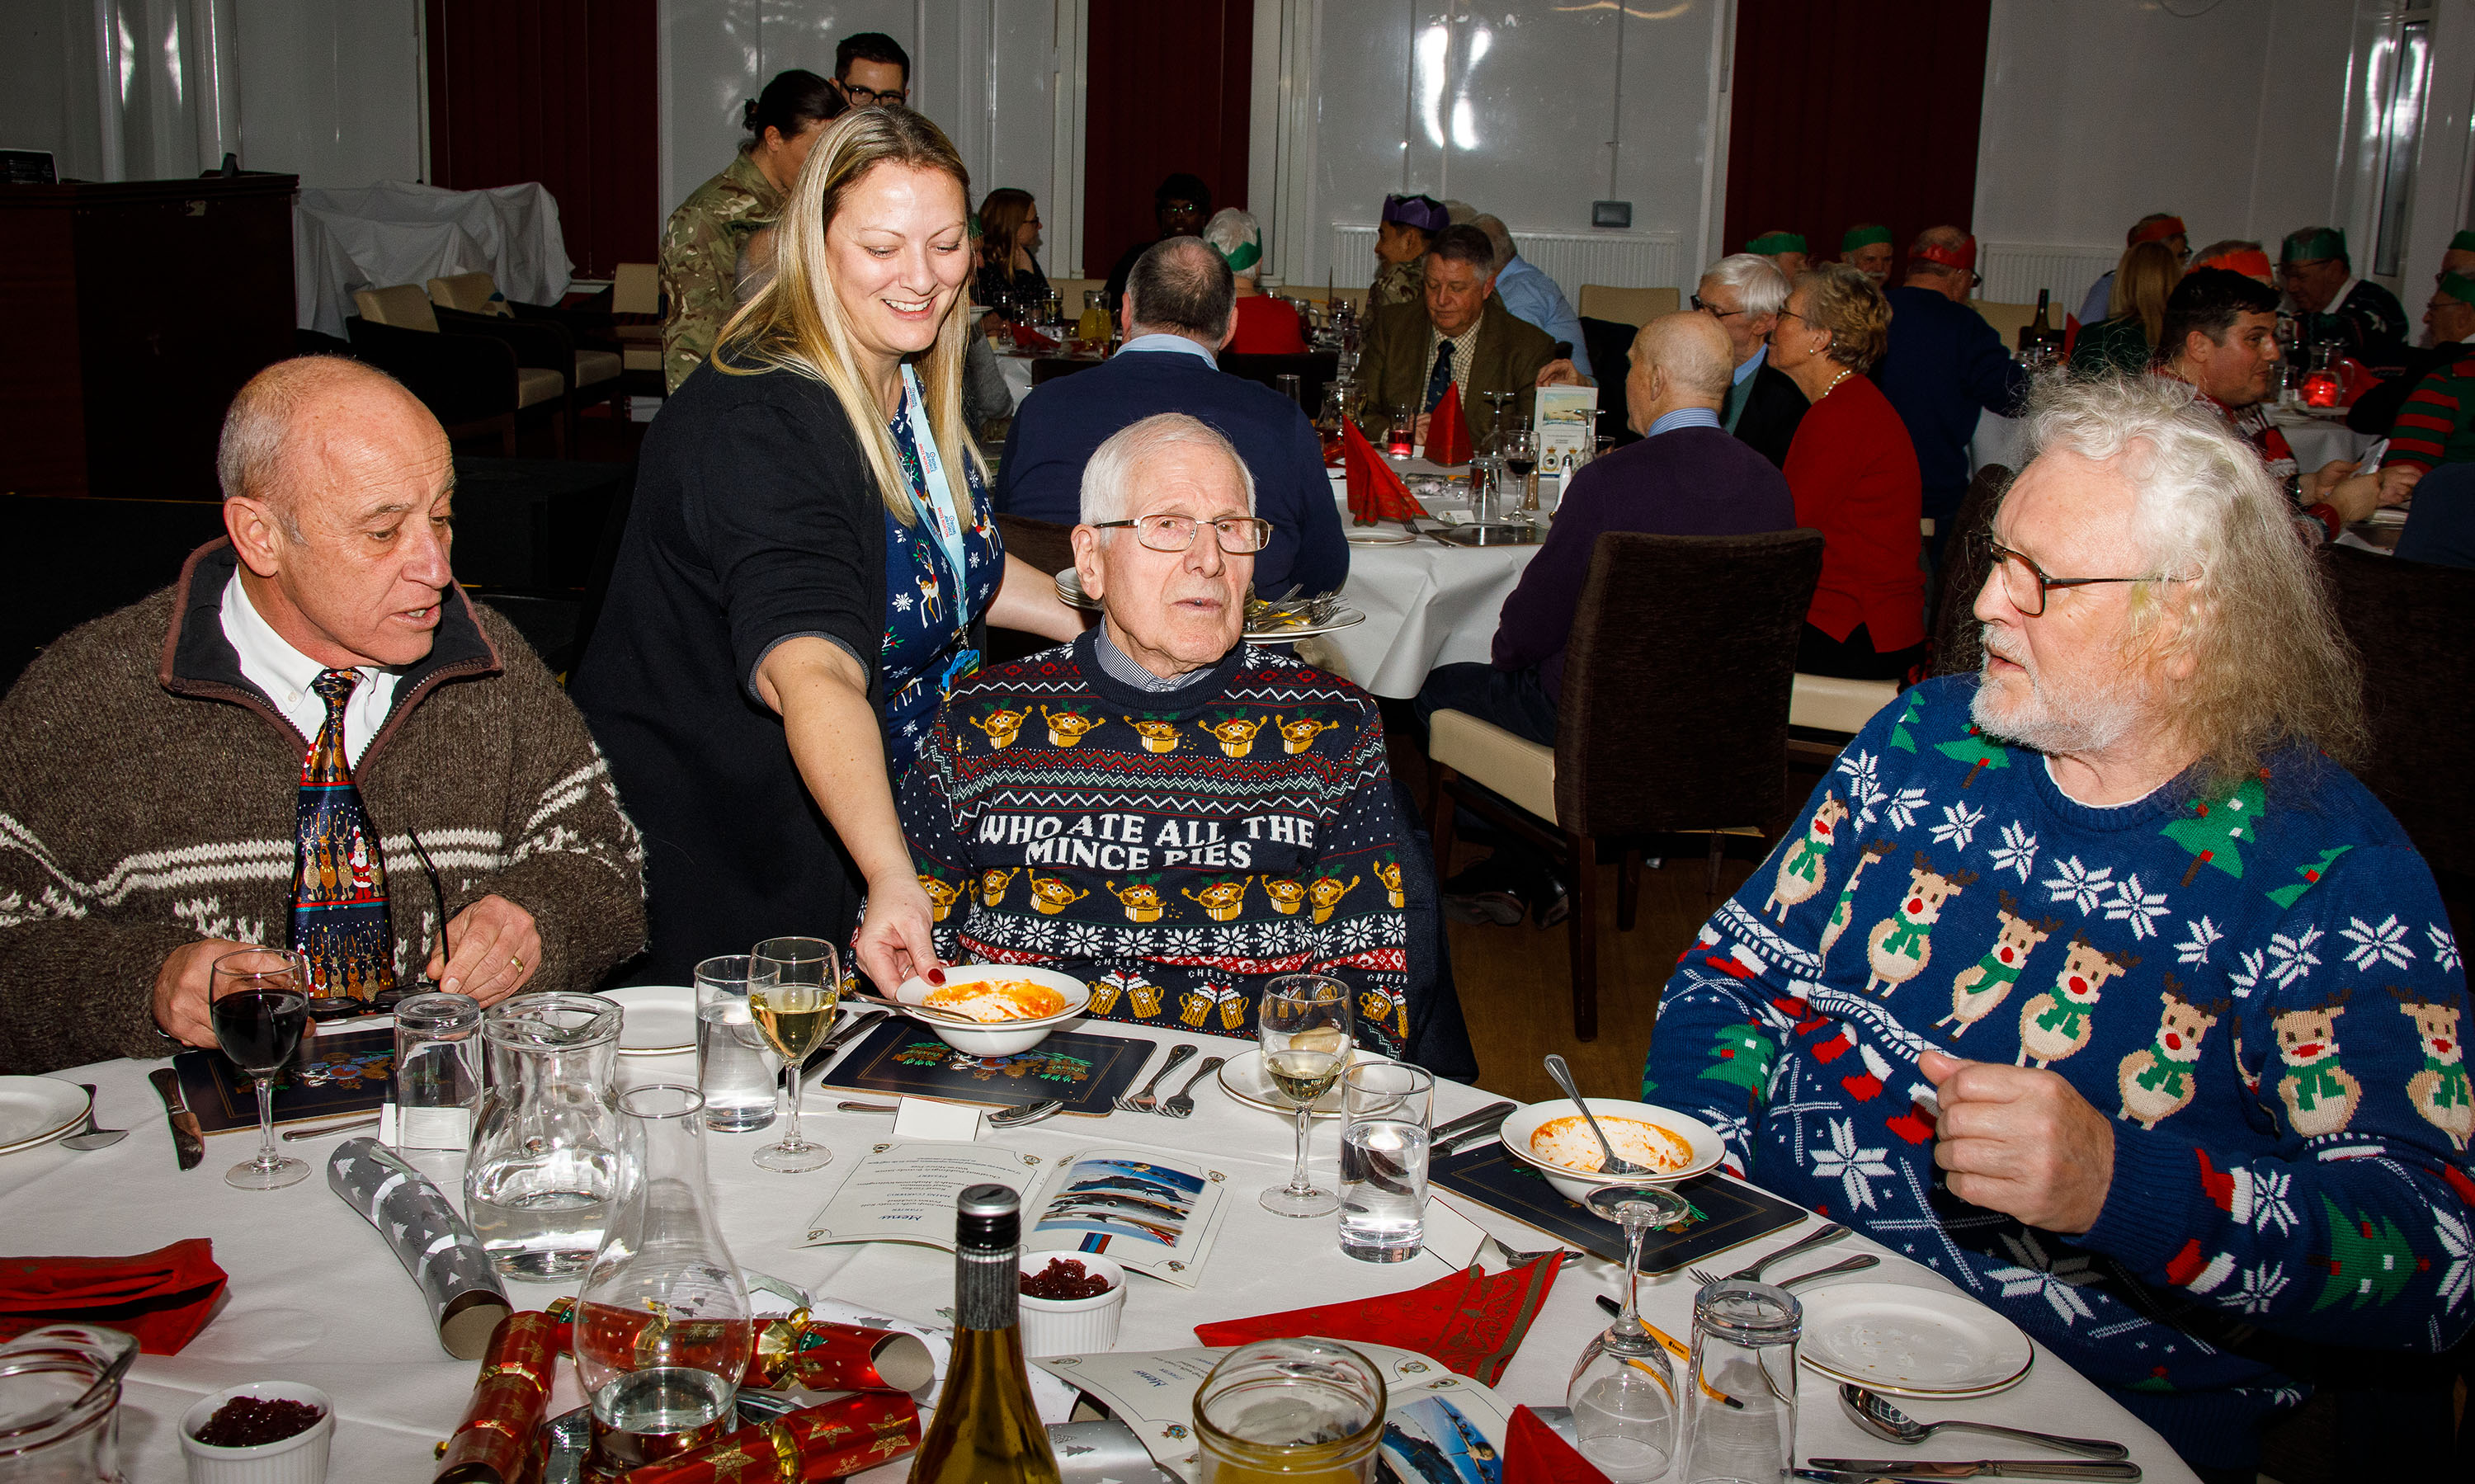 On 6 December, a small team from the Station organised the first Veterans Christmas Lunch since the lockdown started.